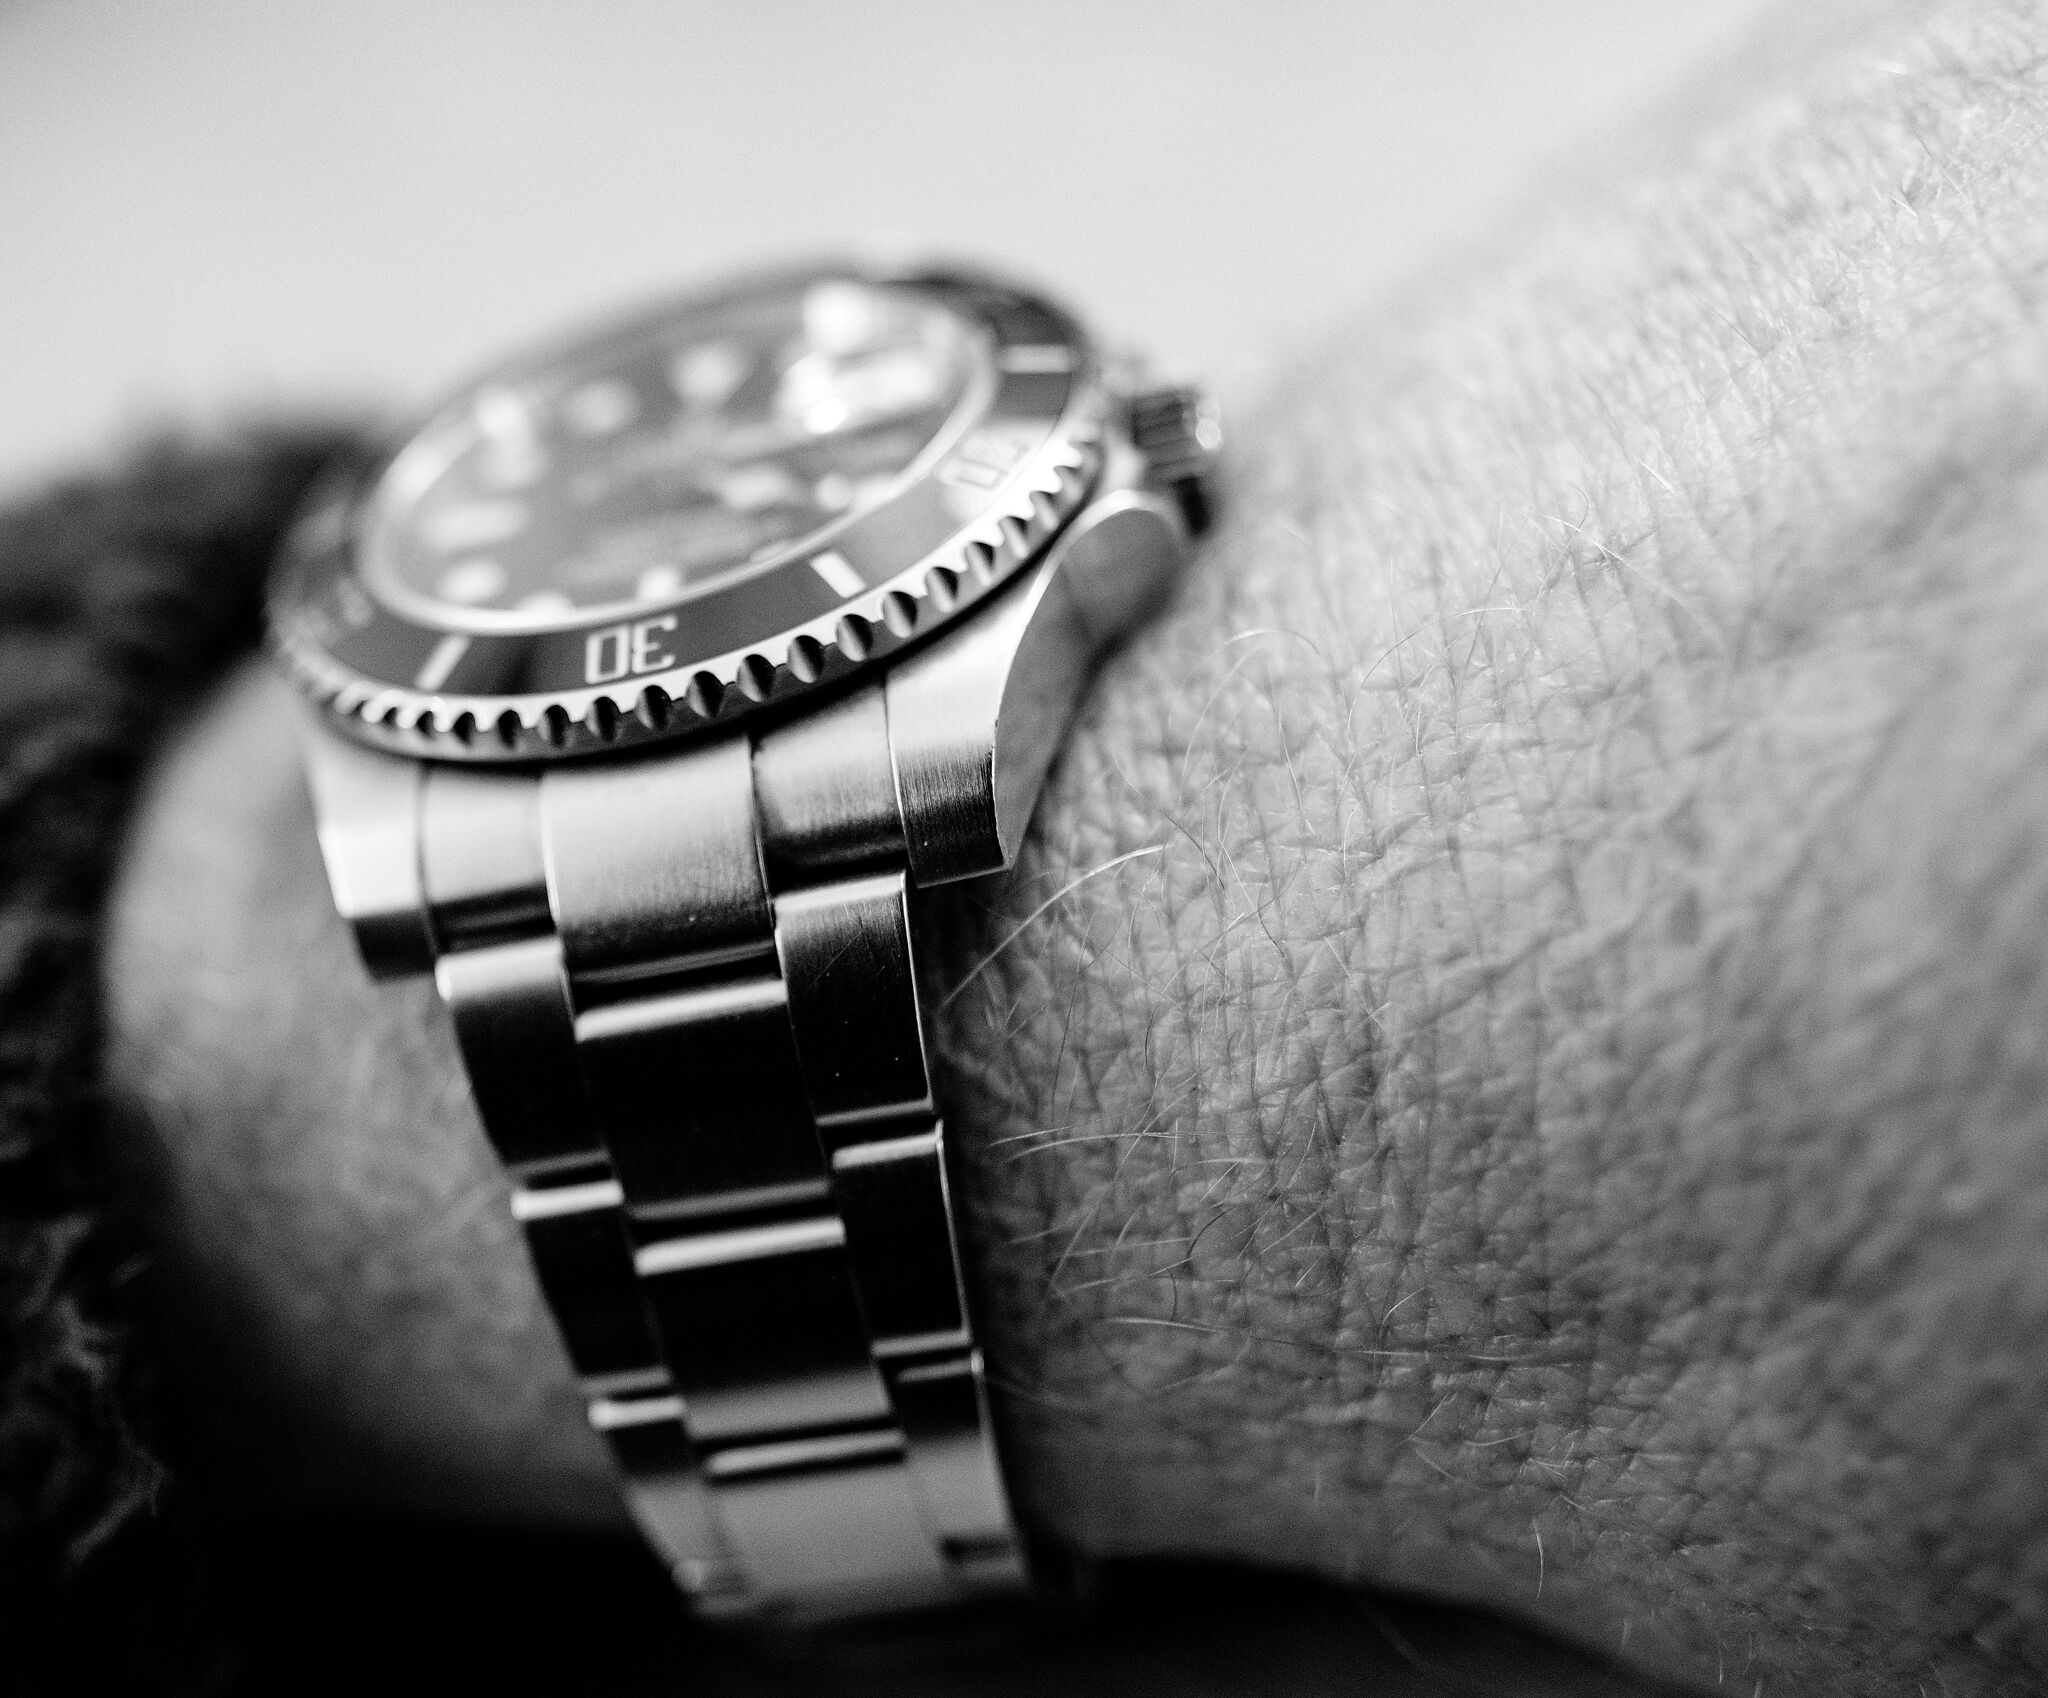 SF PD issues warning on wearing luxury watches (i.e. Rolexes ...